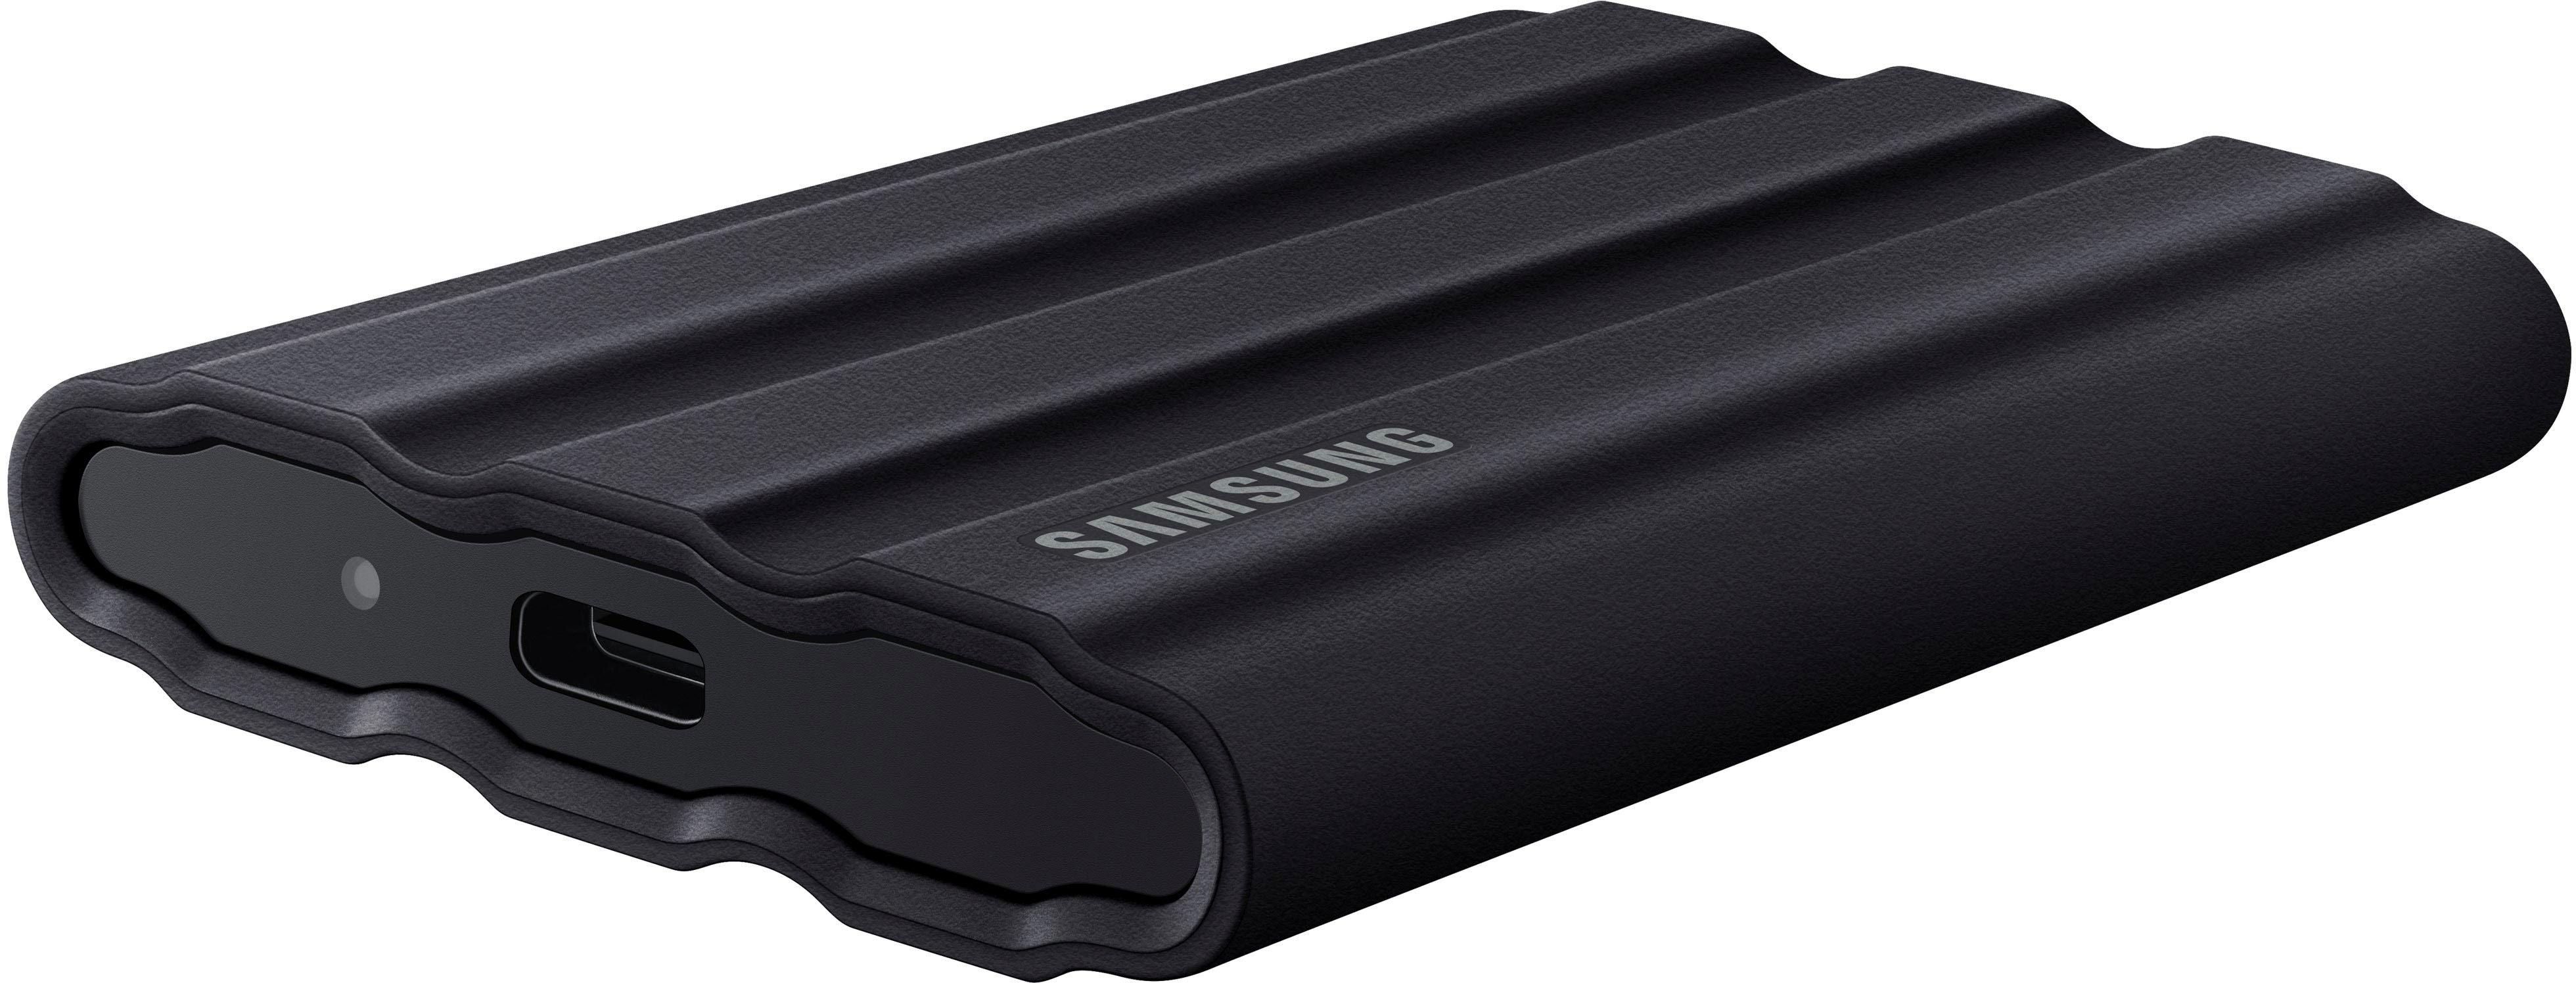 Samsung Portable SSD T7 Shield Review